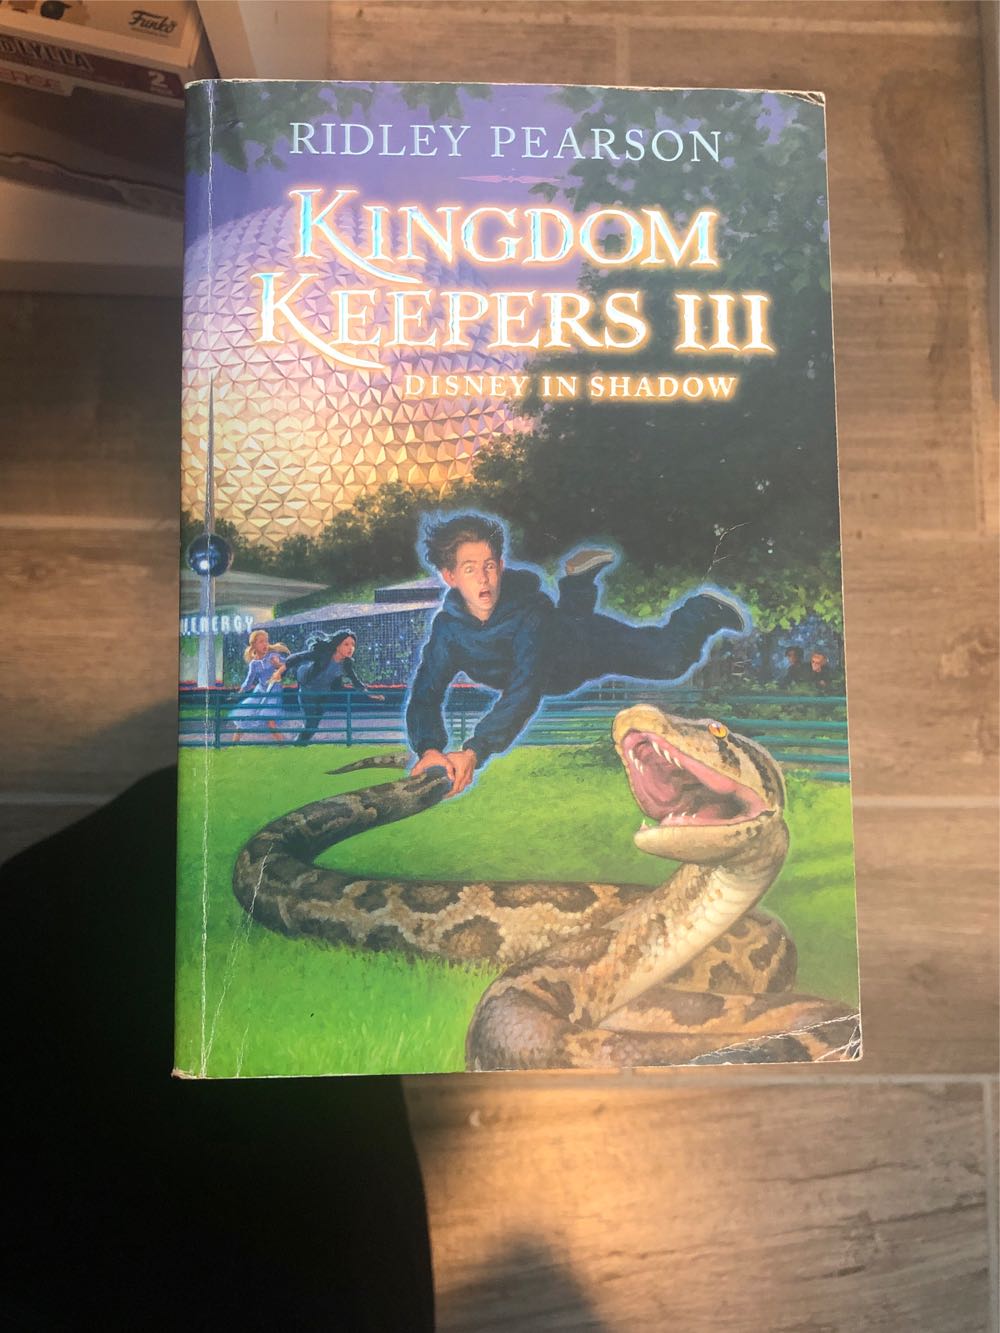 Disney Kingdom Keepers #3: Disney In Shadow - Ridley Pearson (Disney / Hyperion Books - Trade Paperback) book collectible [Barcode 9781423138563] - Main Image 3